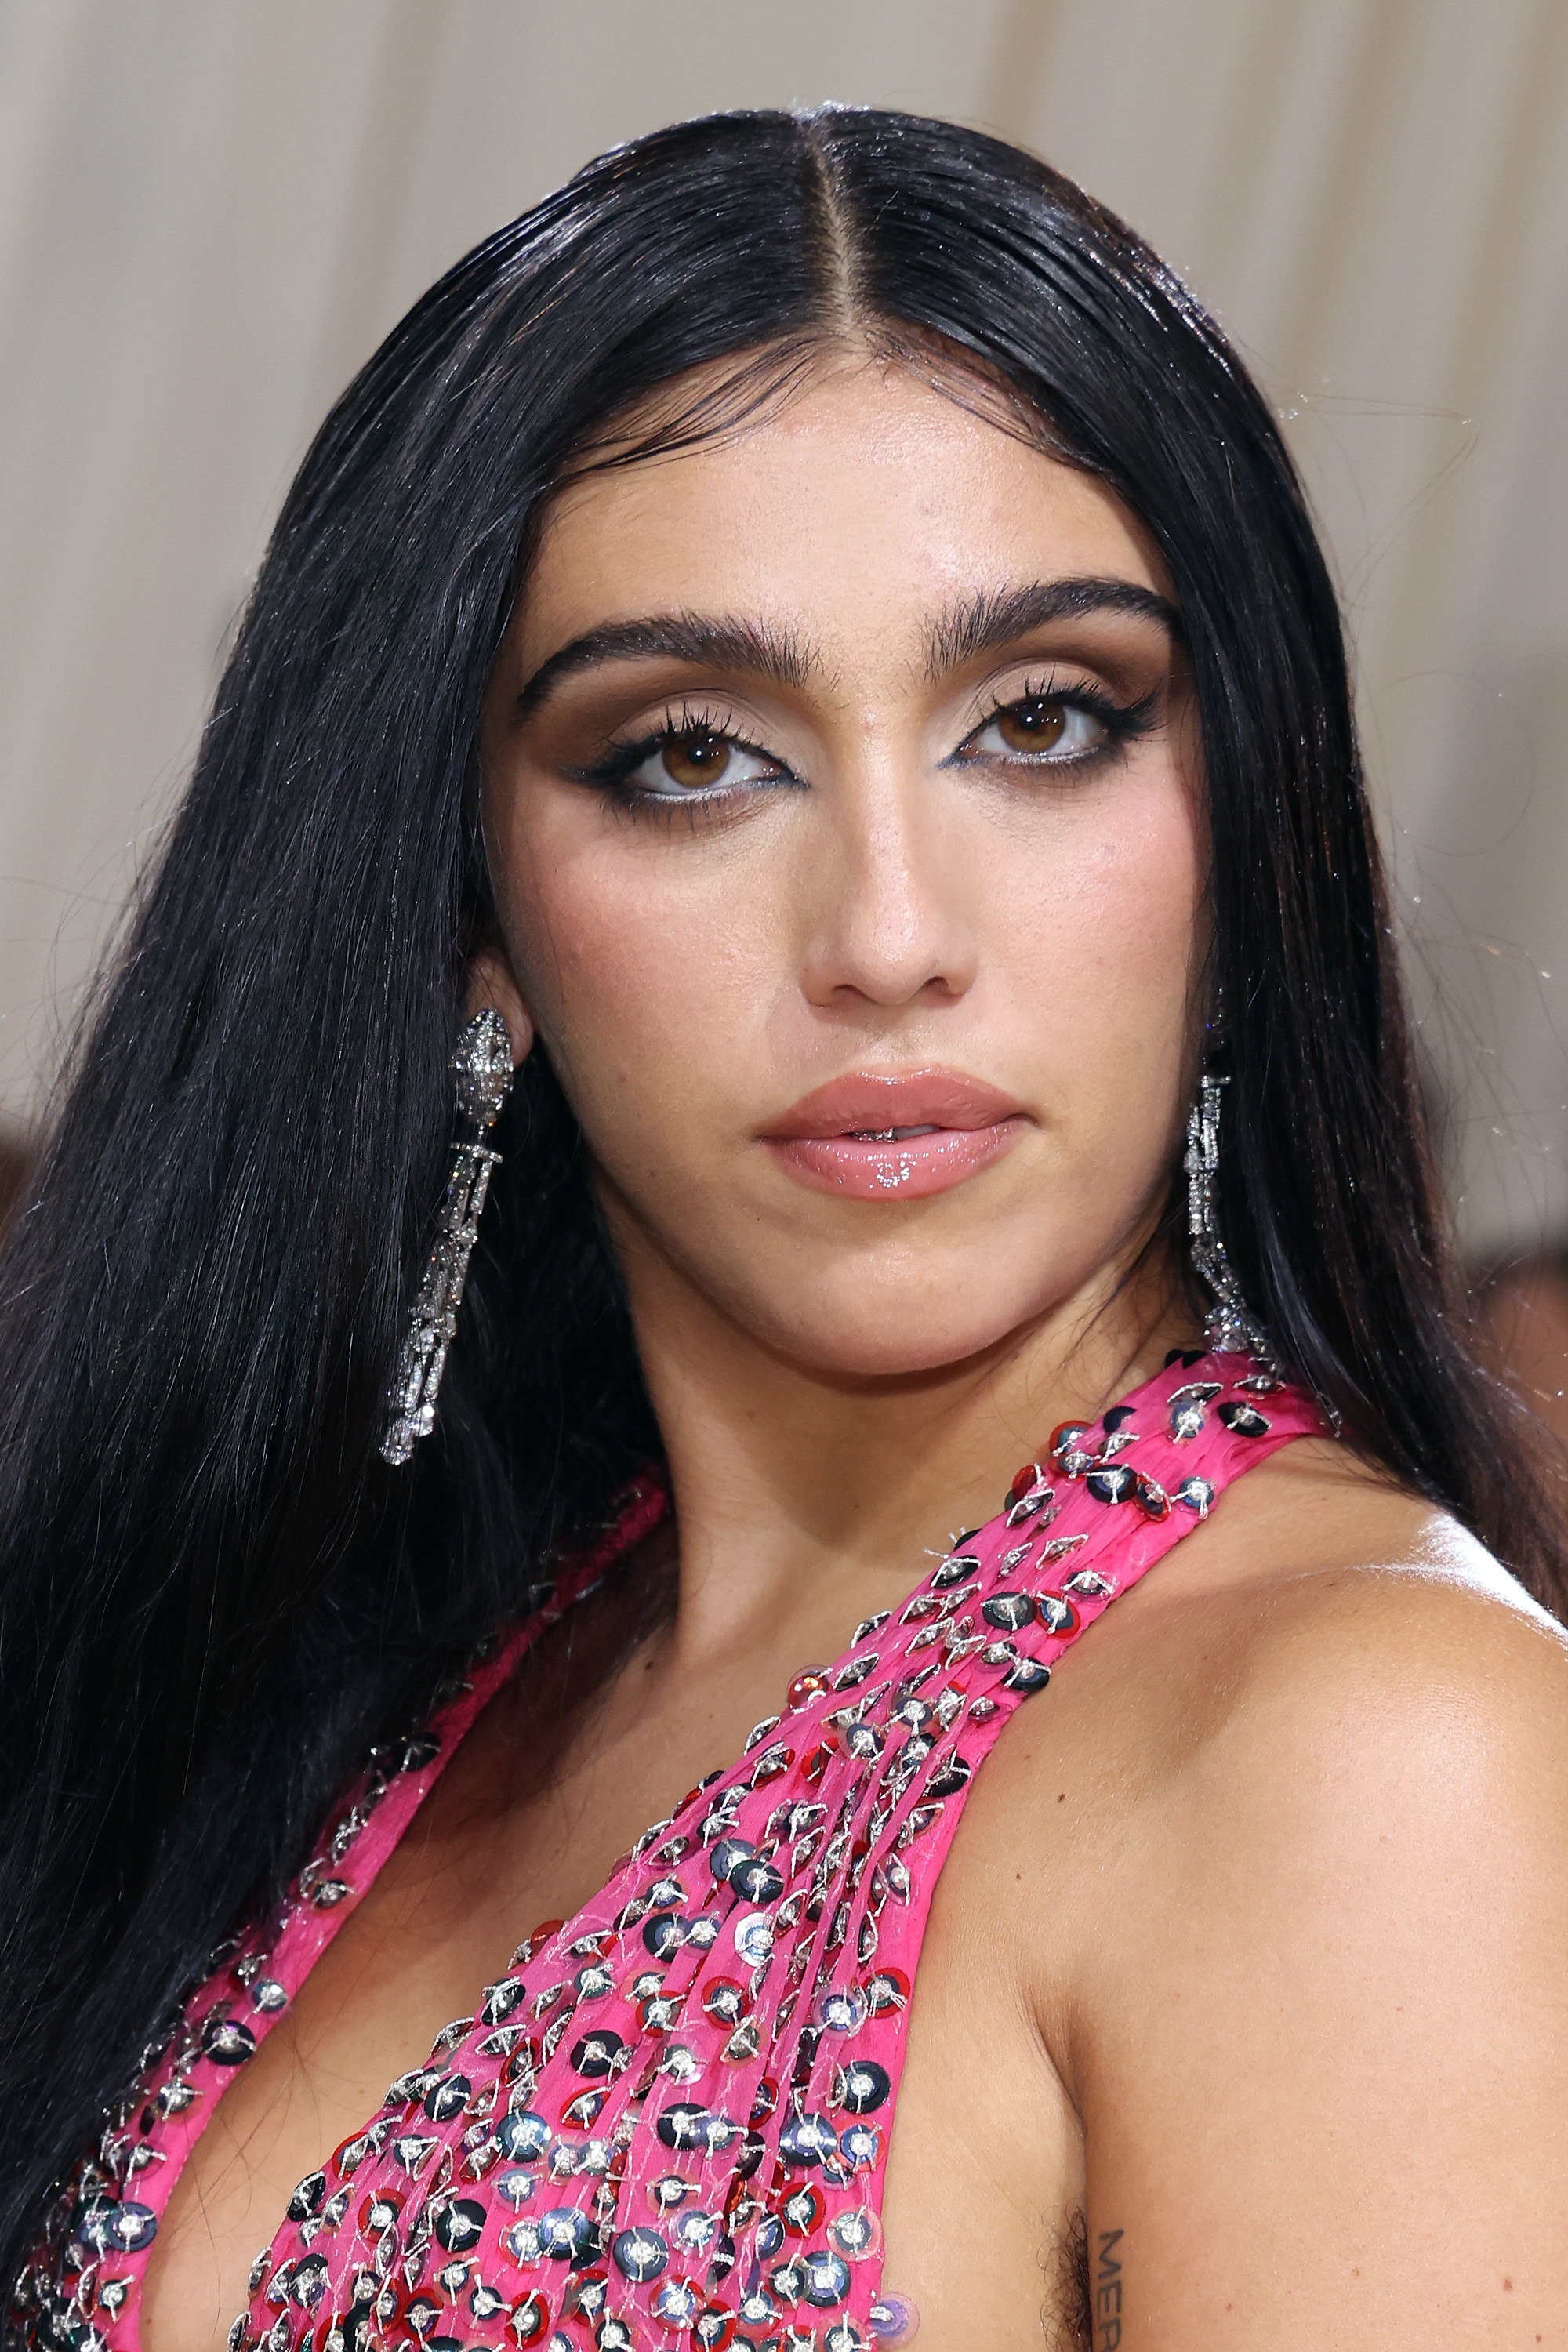 lourdes at the Met gala closeup on her face